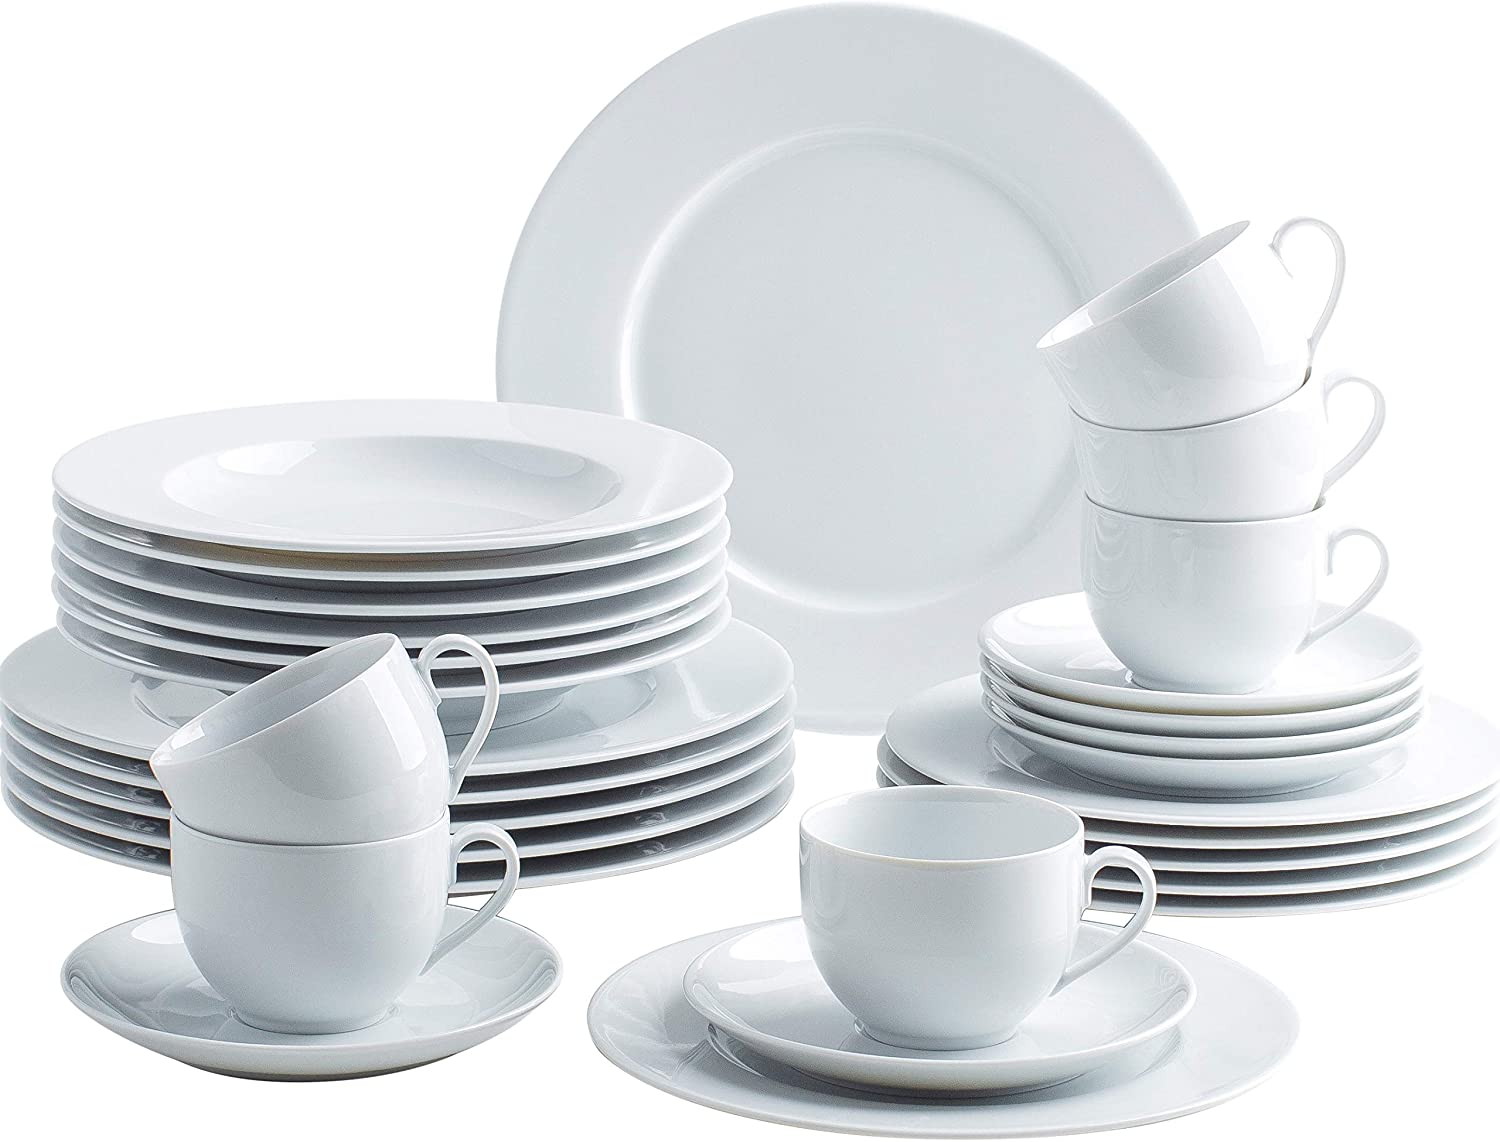 Kahla Aronda 050813M90005B White Porcelain Dinner Service for 6 People Round Soup Plates Large Dinner Plates Cups Snack Plates